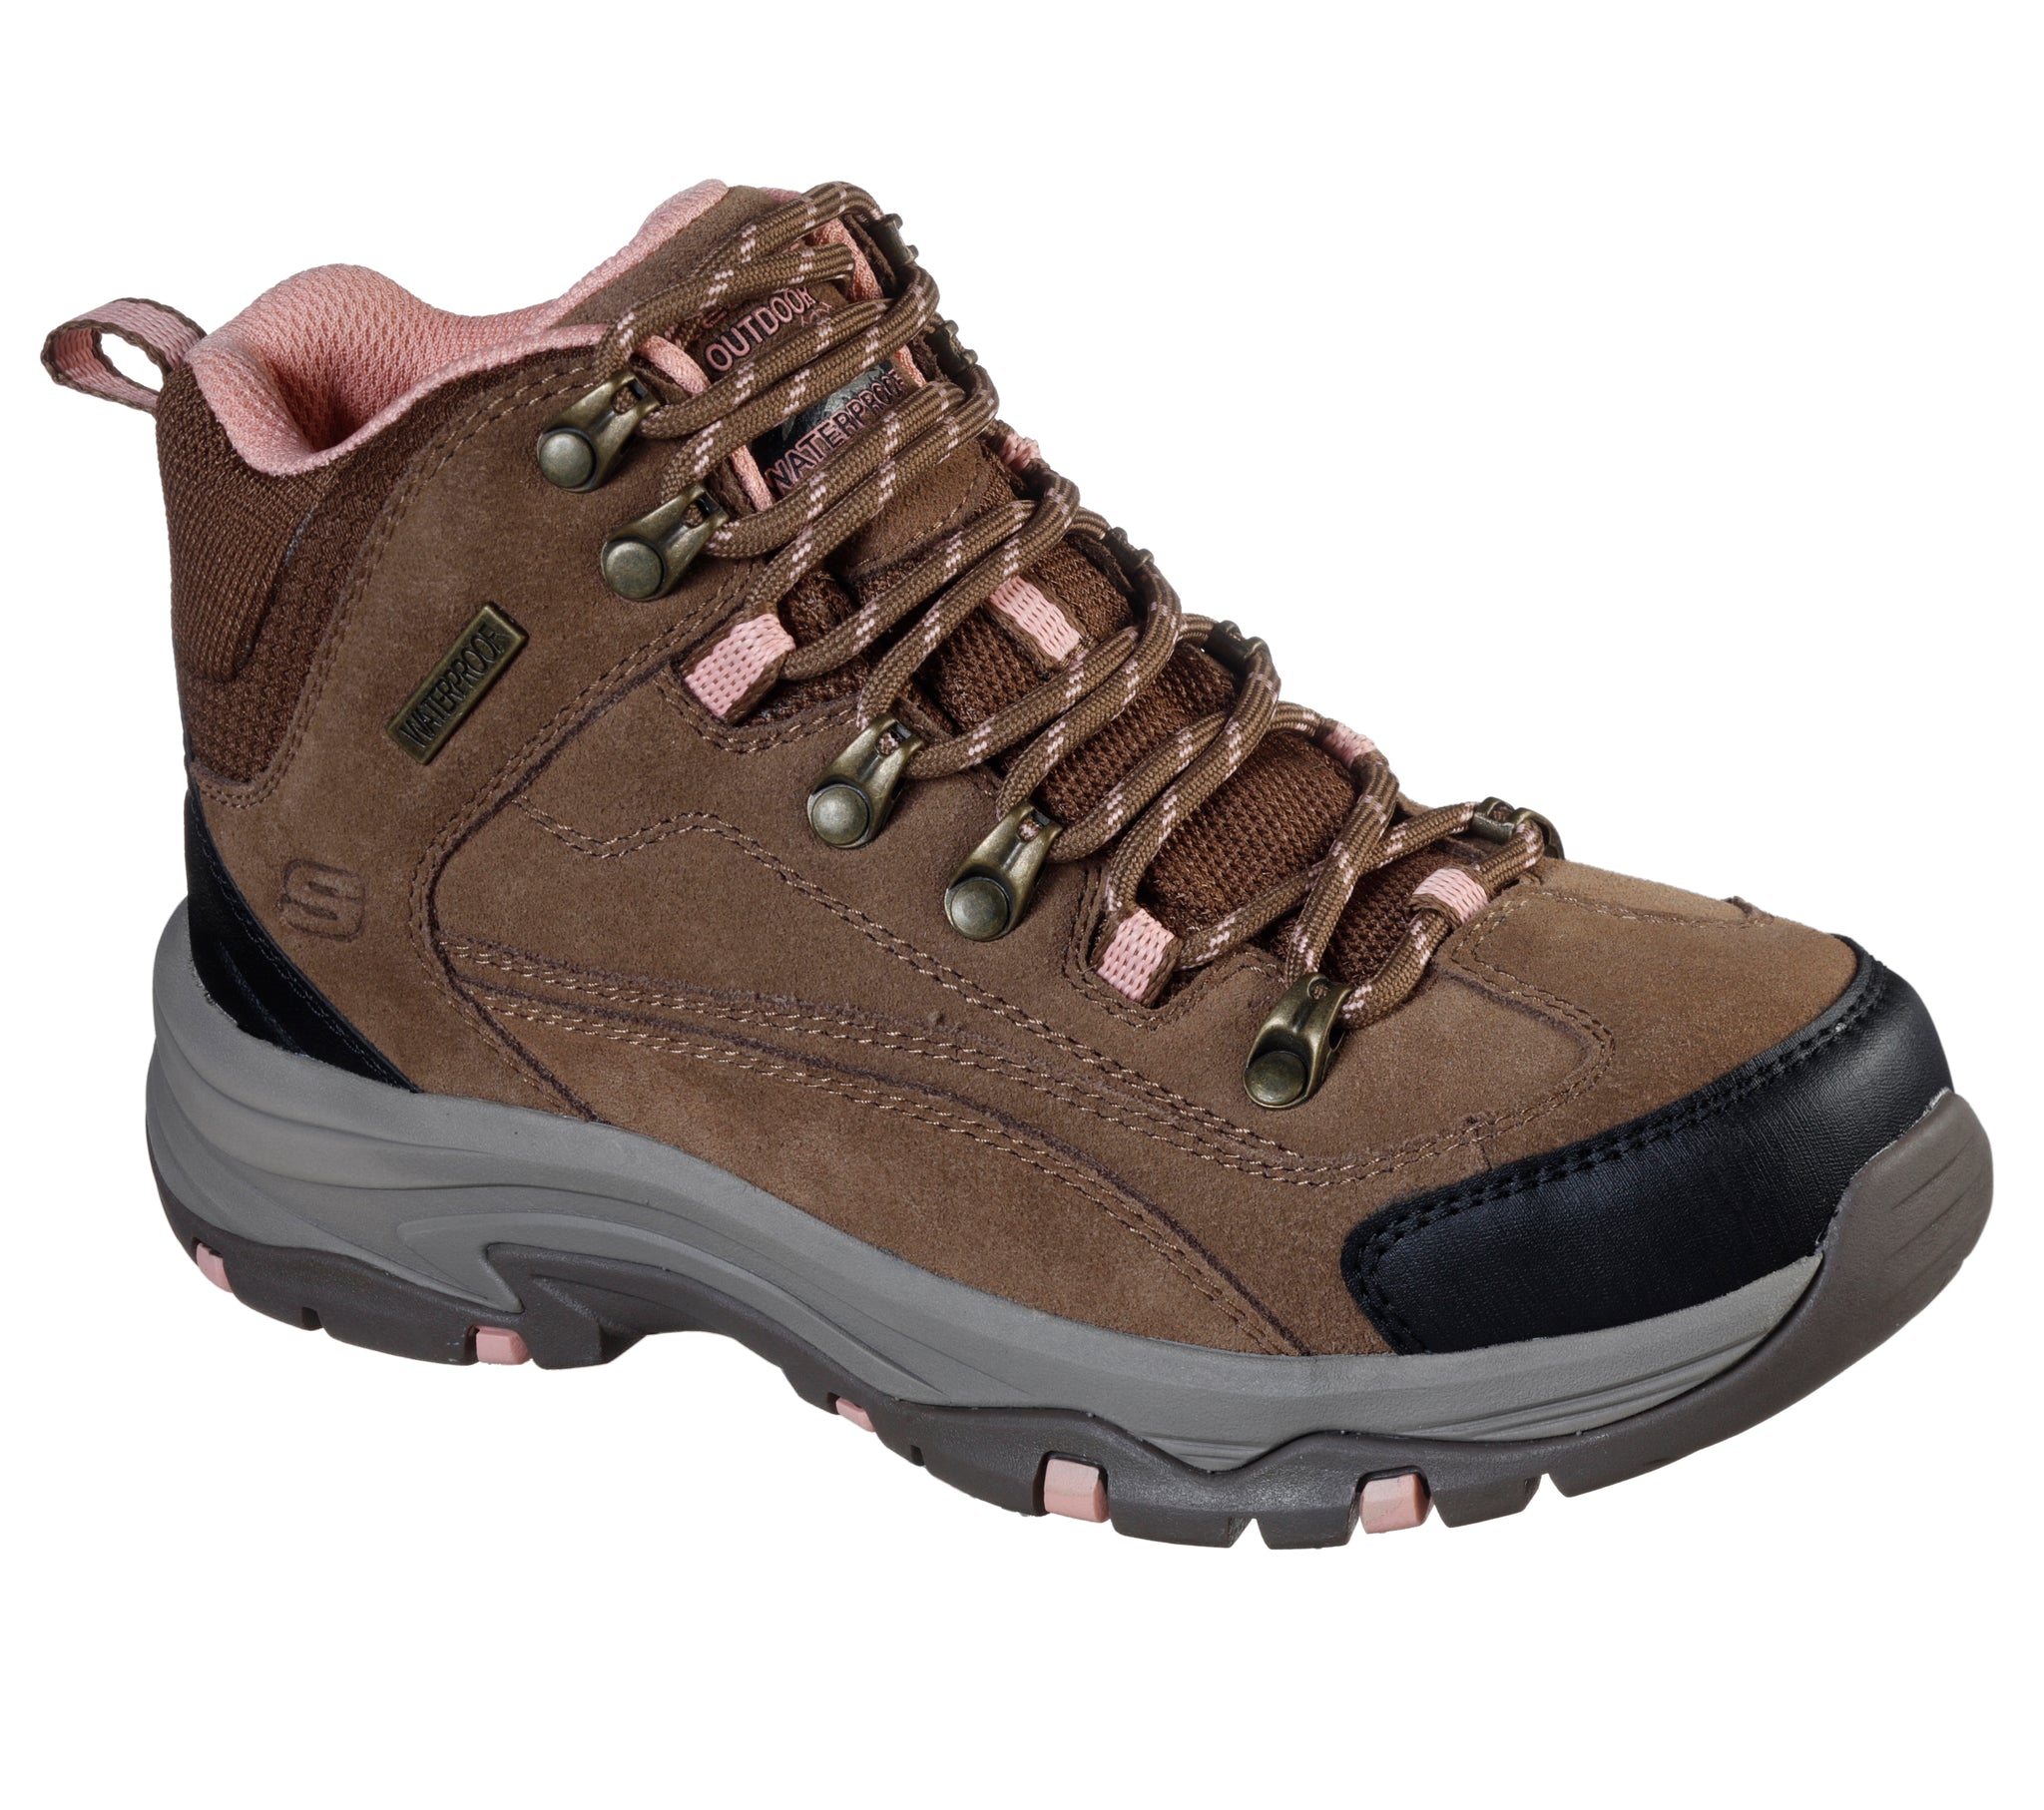 167004  - RELAXED FIT: TREGO - ALPINE TRAIL - Shoess